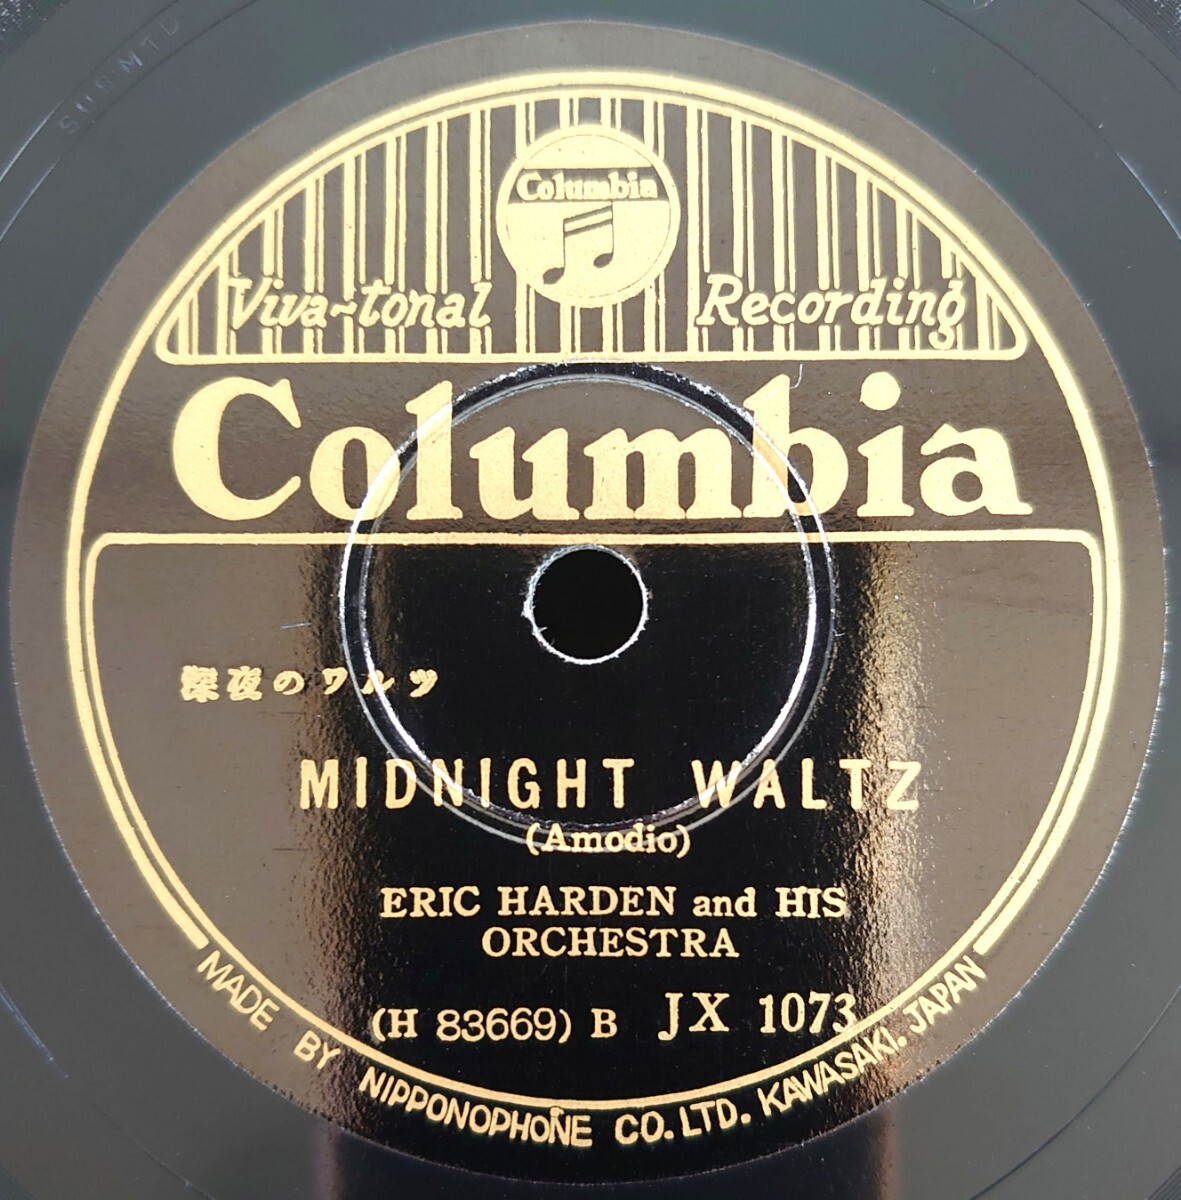 【SP盤レコード】THE SKATERS,WALTZ-氷滑り VICTOR SILVESTER’S HARMONY MUSIC/MIDNIGHT WALTZ-深夜のワルツ ERIC HARDEN and HIS Orch._画像5